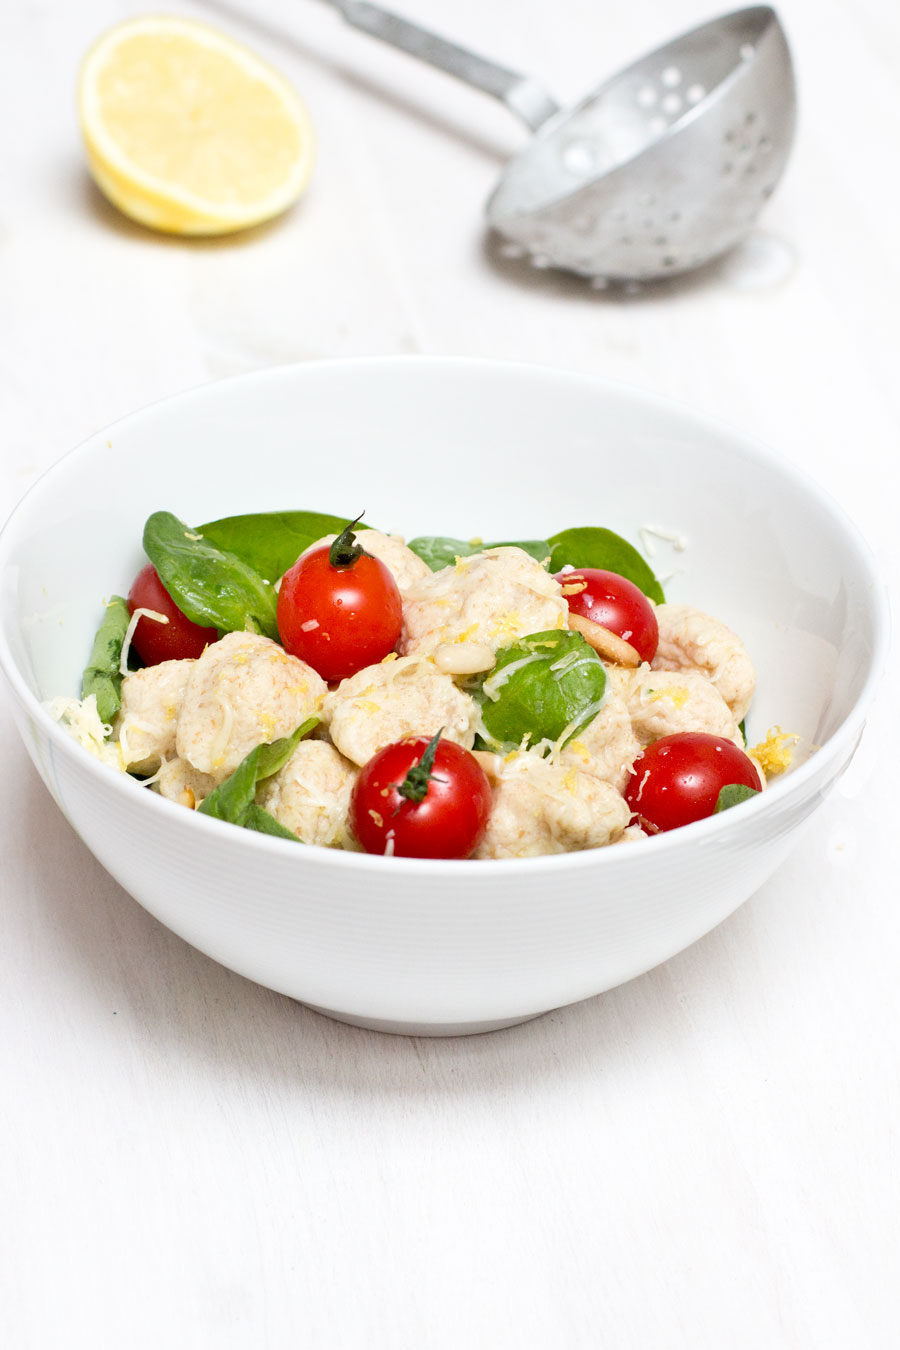 Make an easy and healthy office lunch recipe with homemade ricotta with fresh tomatoes and spinach.